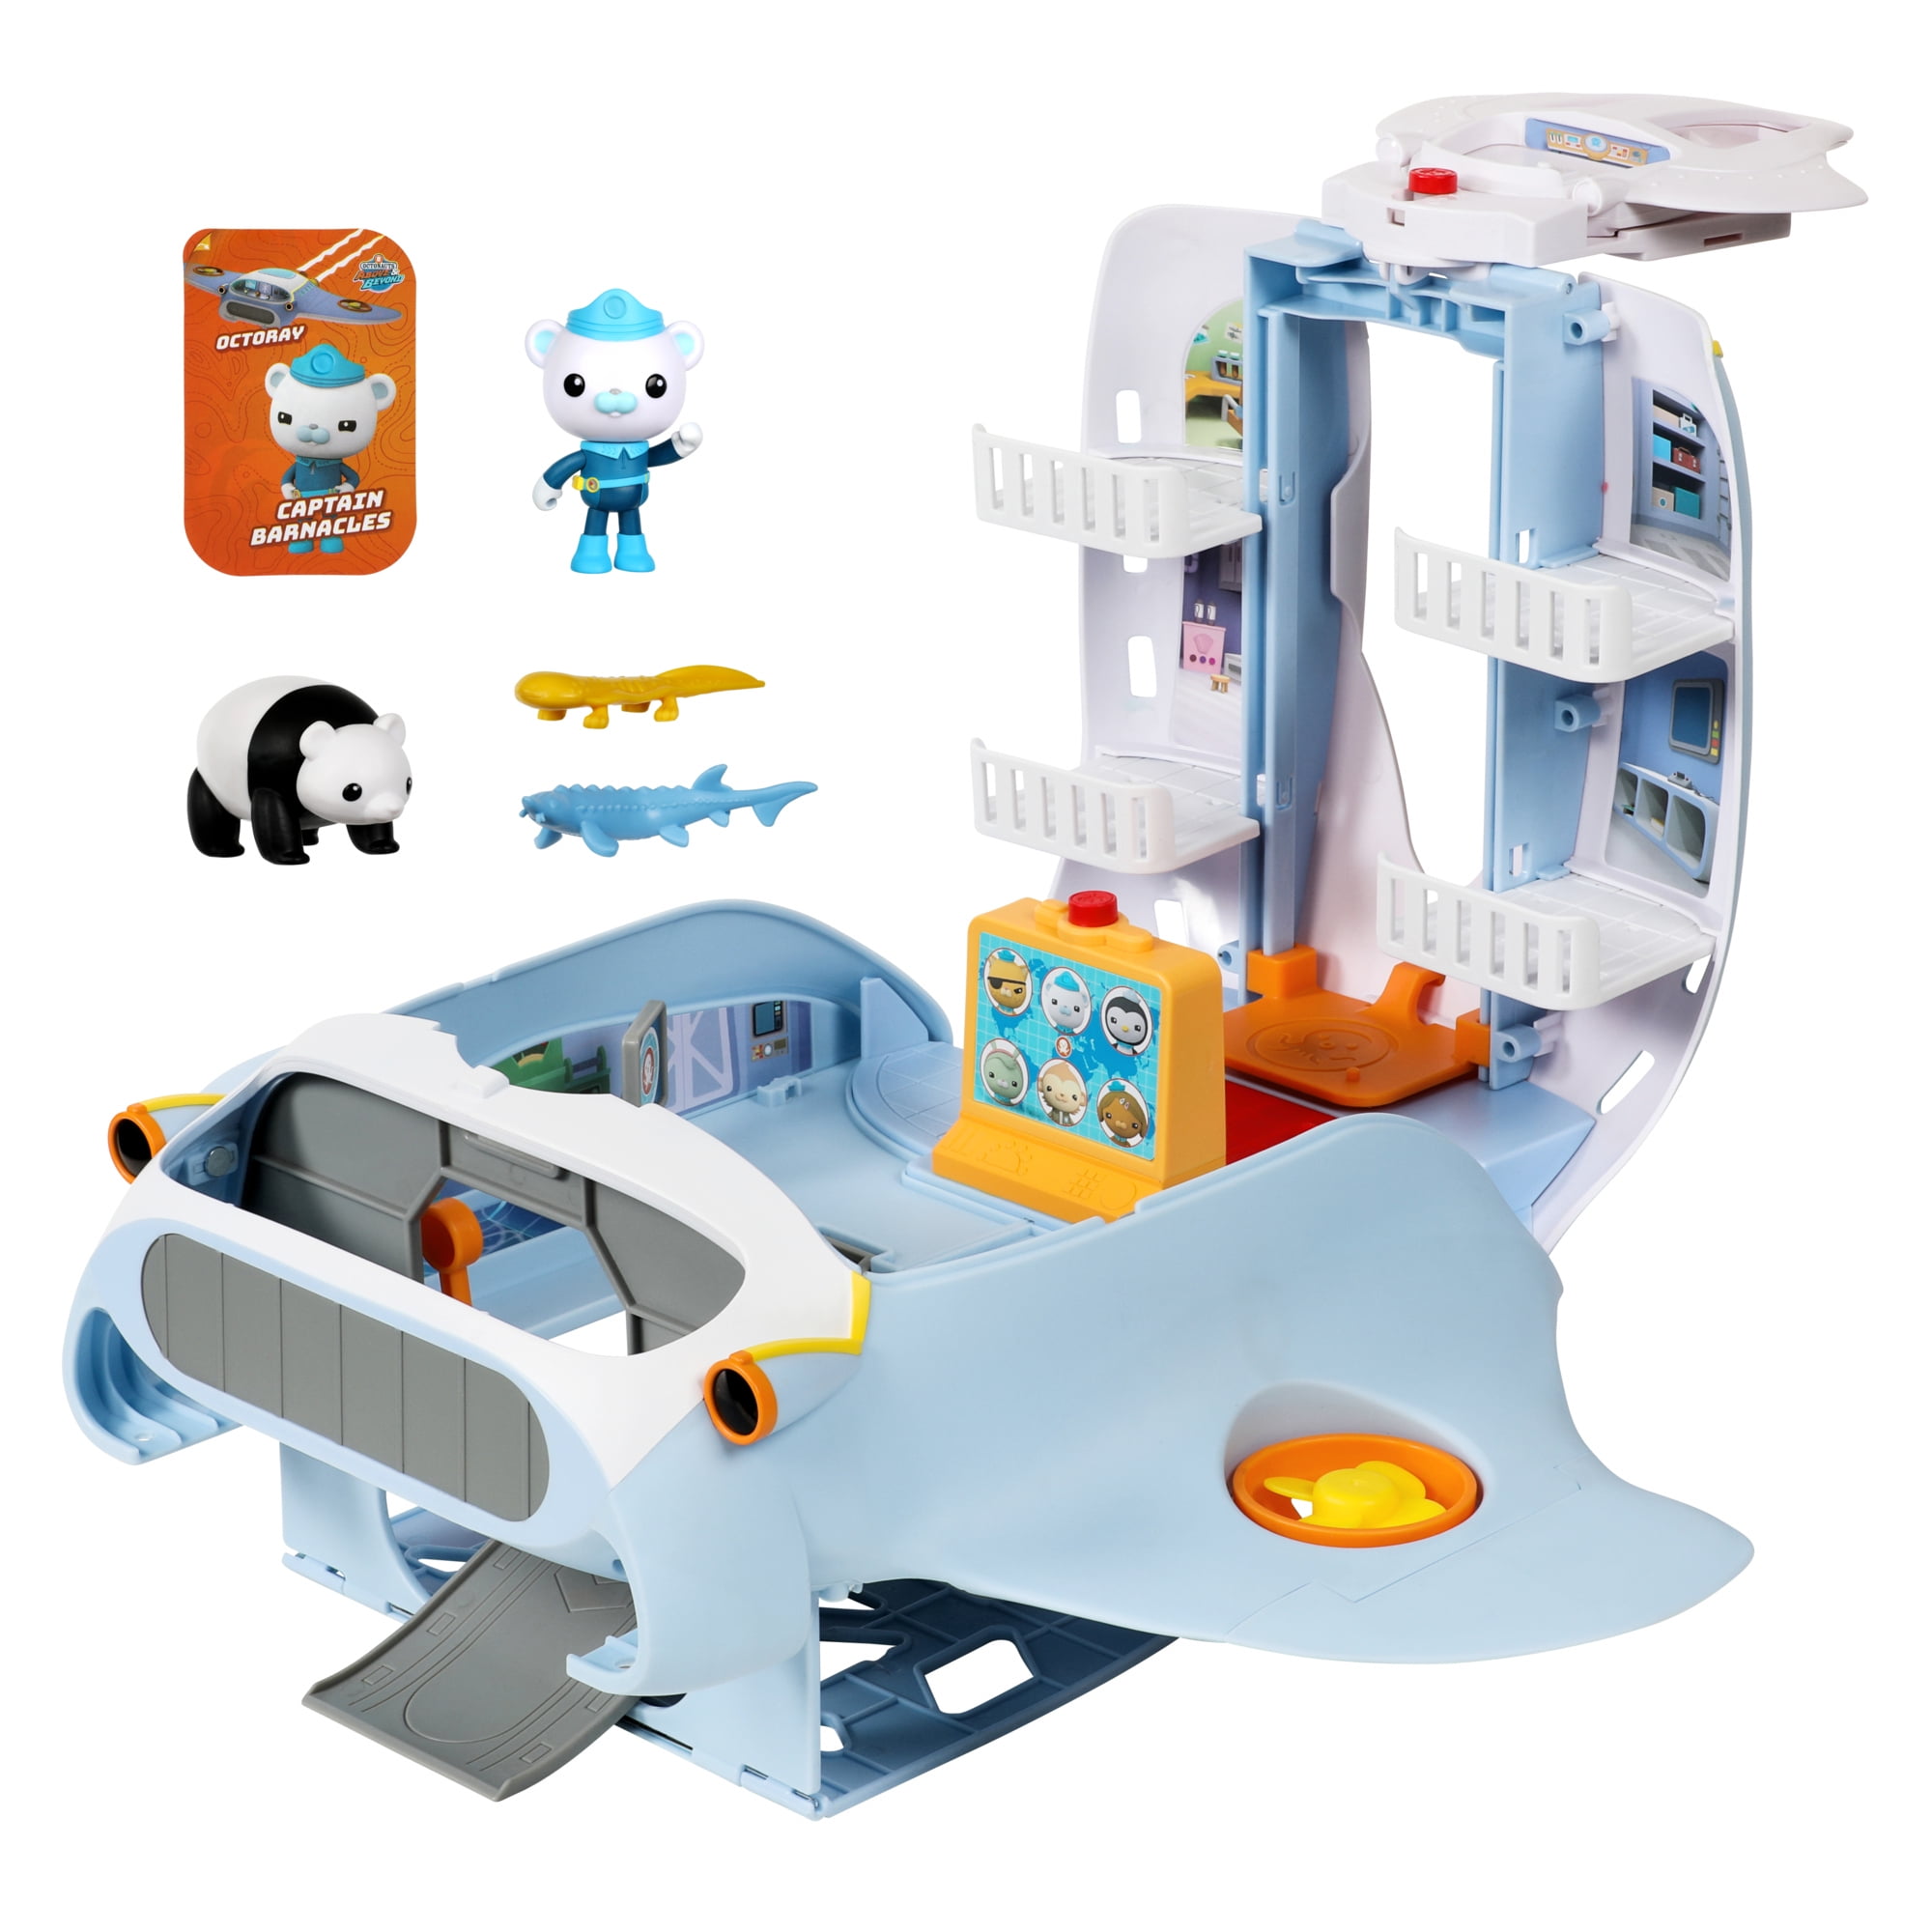 Octonauts Above & Beyond, Octoray 13 inch Transforming Playset with Captain Barnacles 3 inch Figure and Accessories, 25+ Lights and Sounds, Preschool, Ages 3+